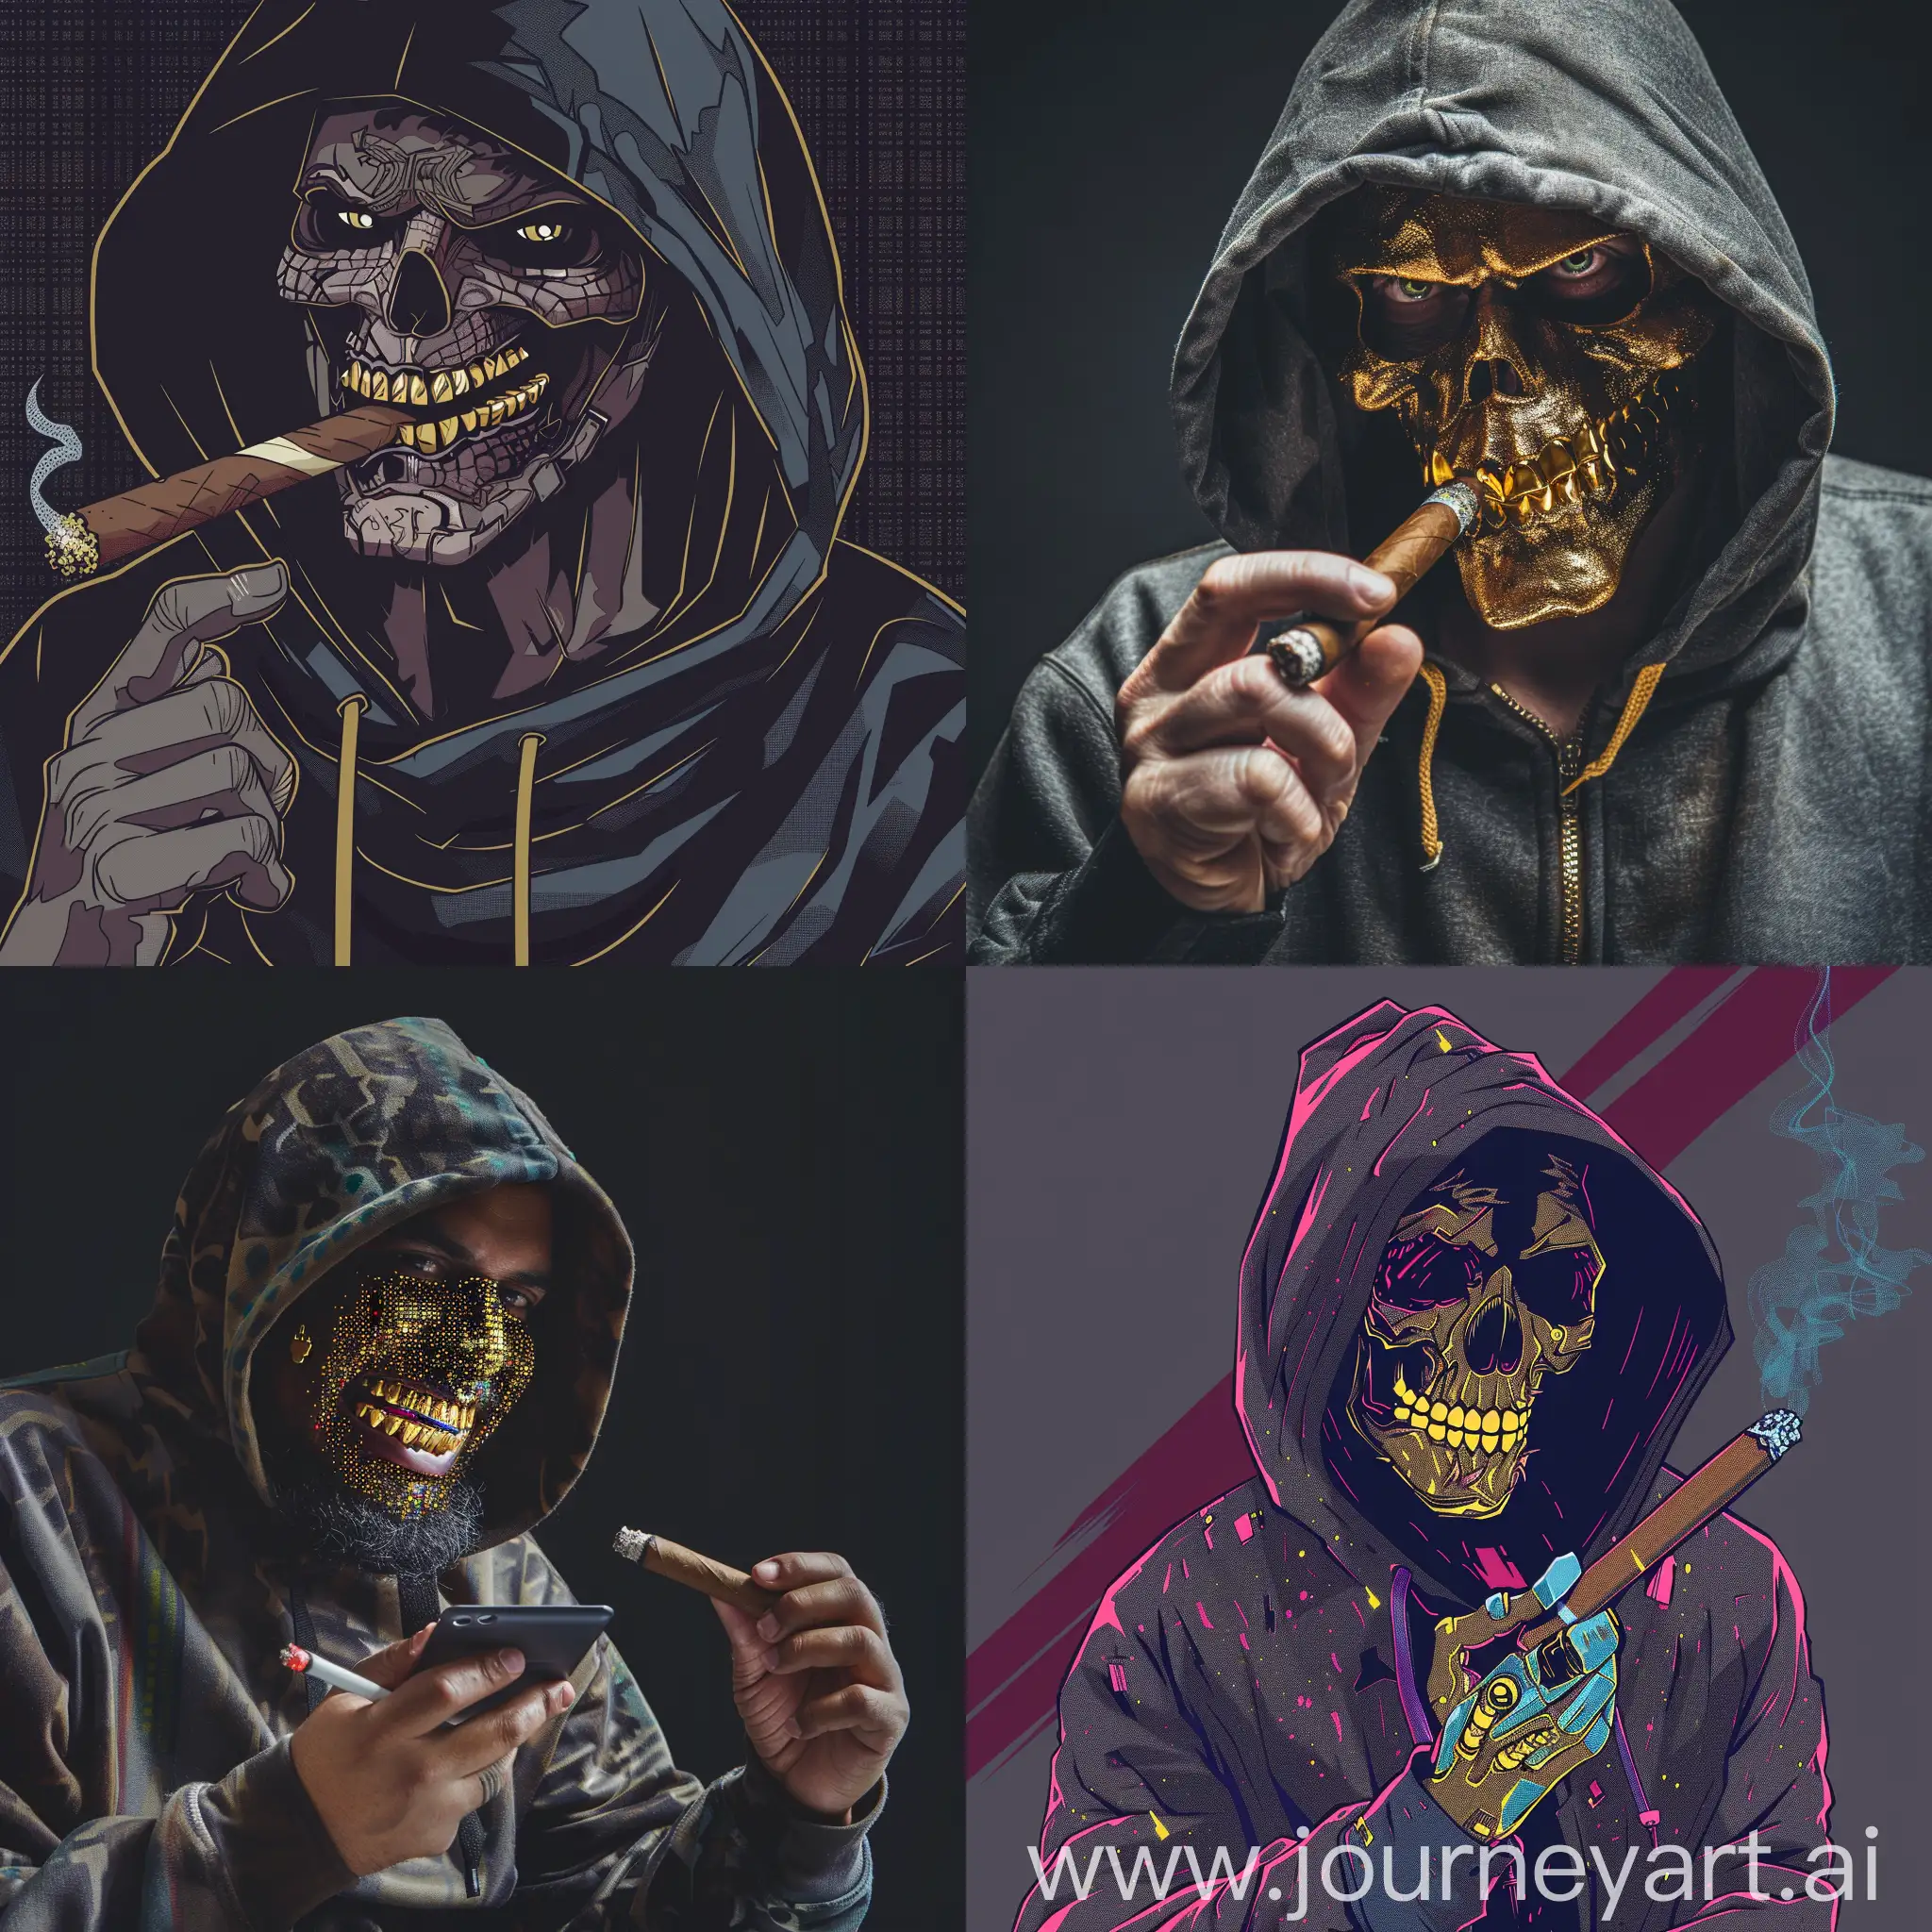 Scheming-Hacker-in-Hoodie-with-Cigar-Cybersecurity-Theme